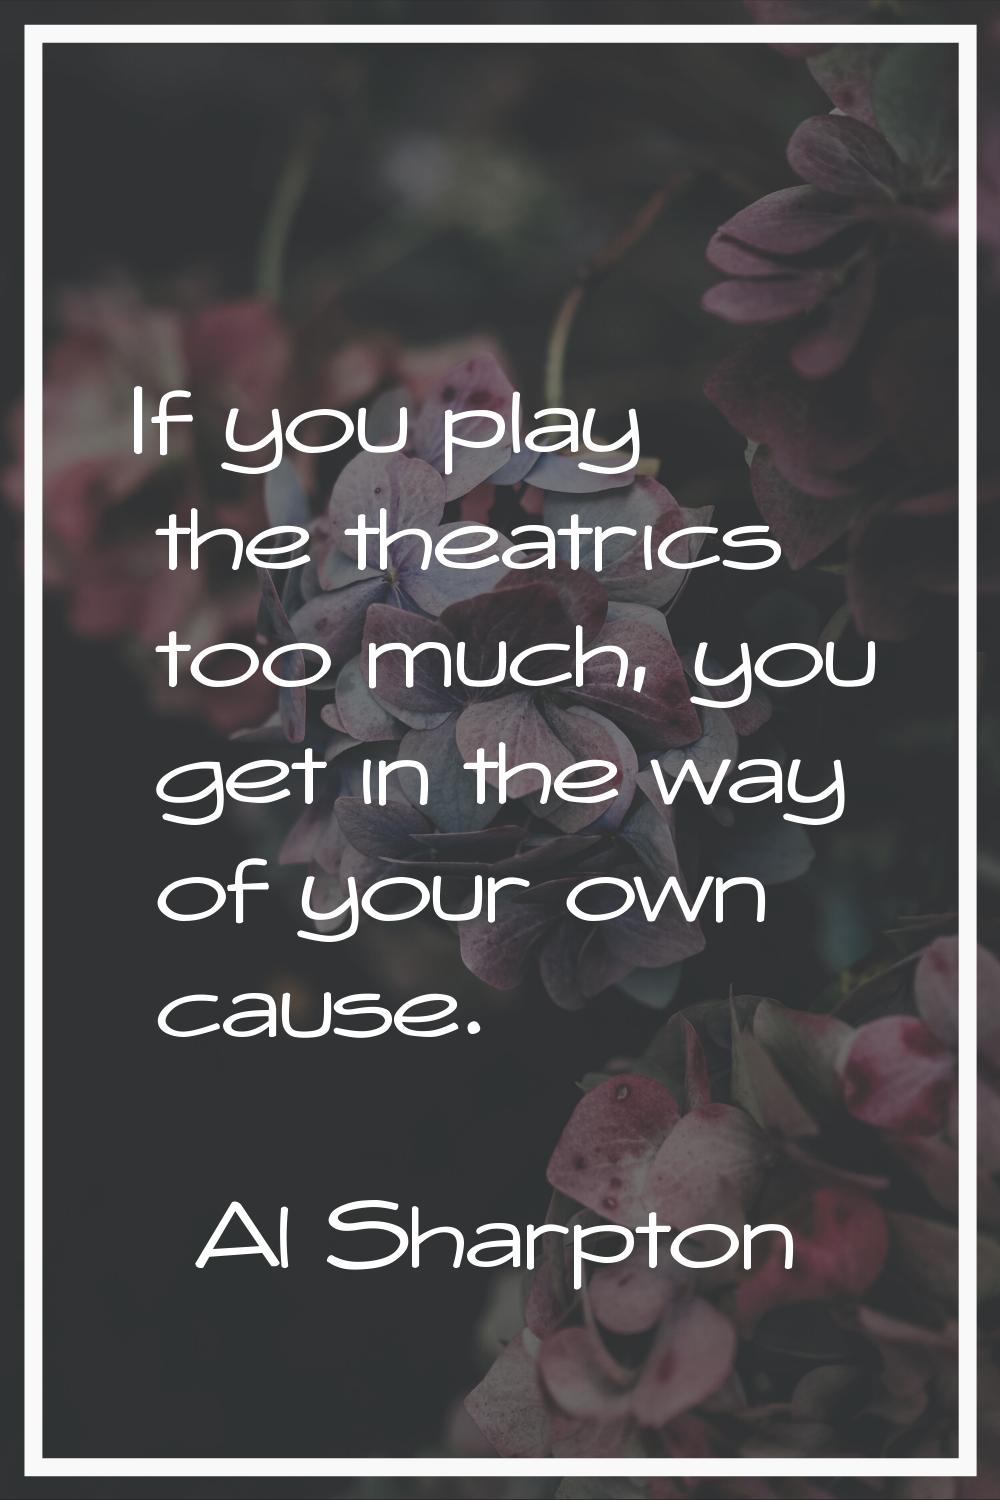 If you play the theatrics too much, you get in the way of your own cause.